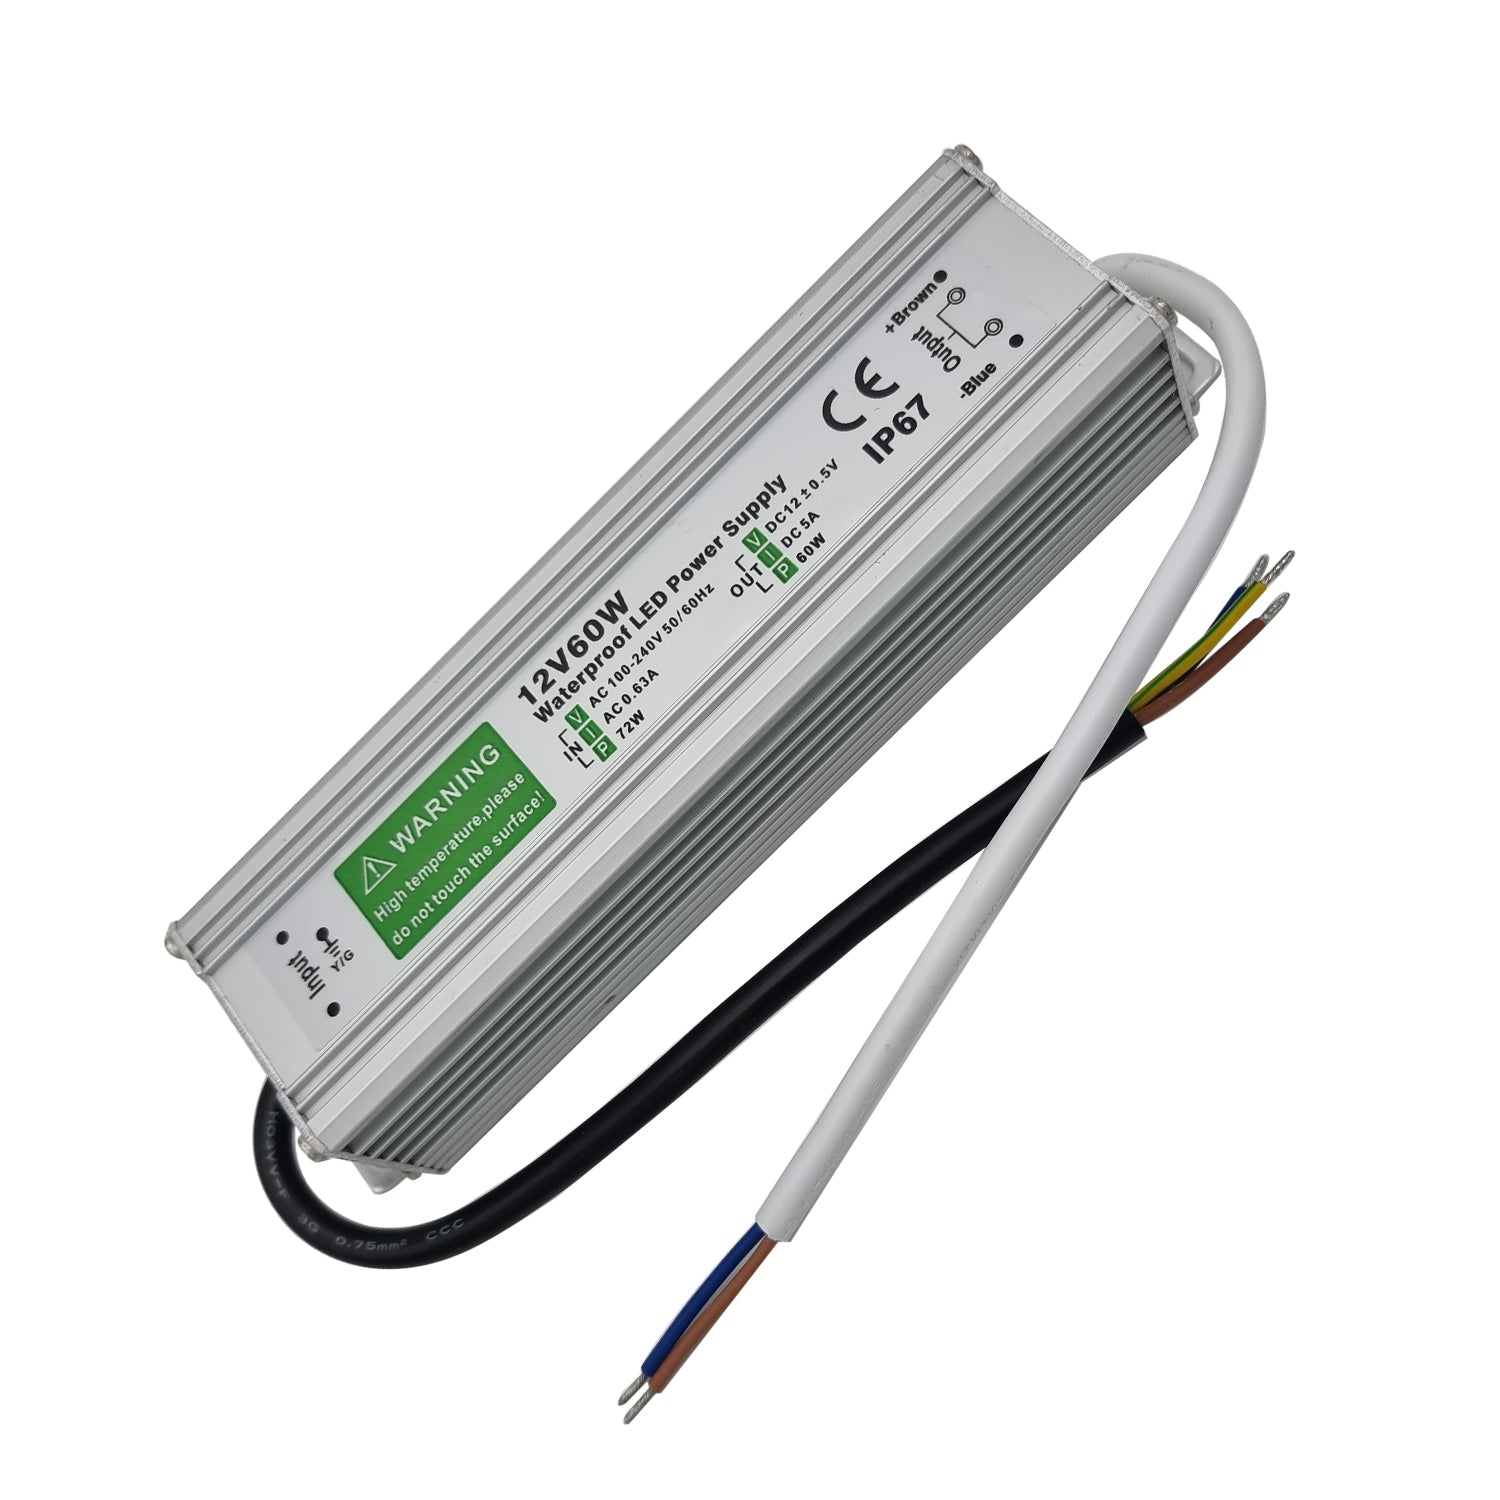 DC12V IP67 60W 5 A Waterproof LED Driver Power Supply Transformer~3355